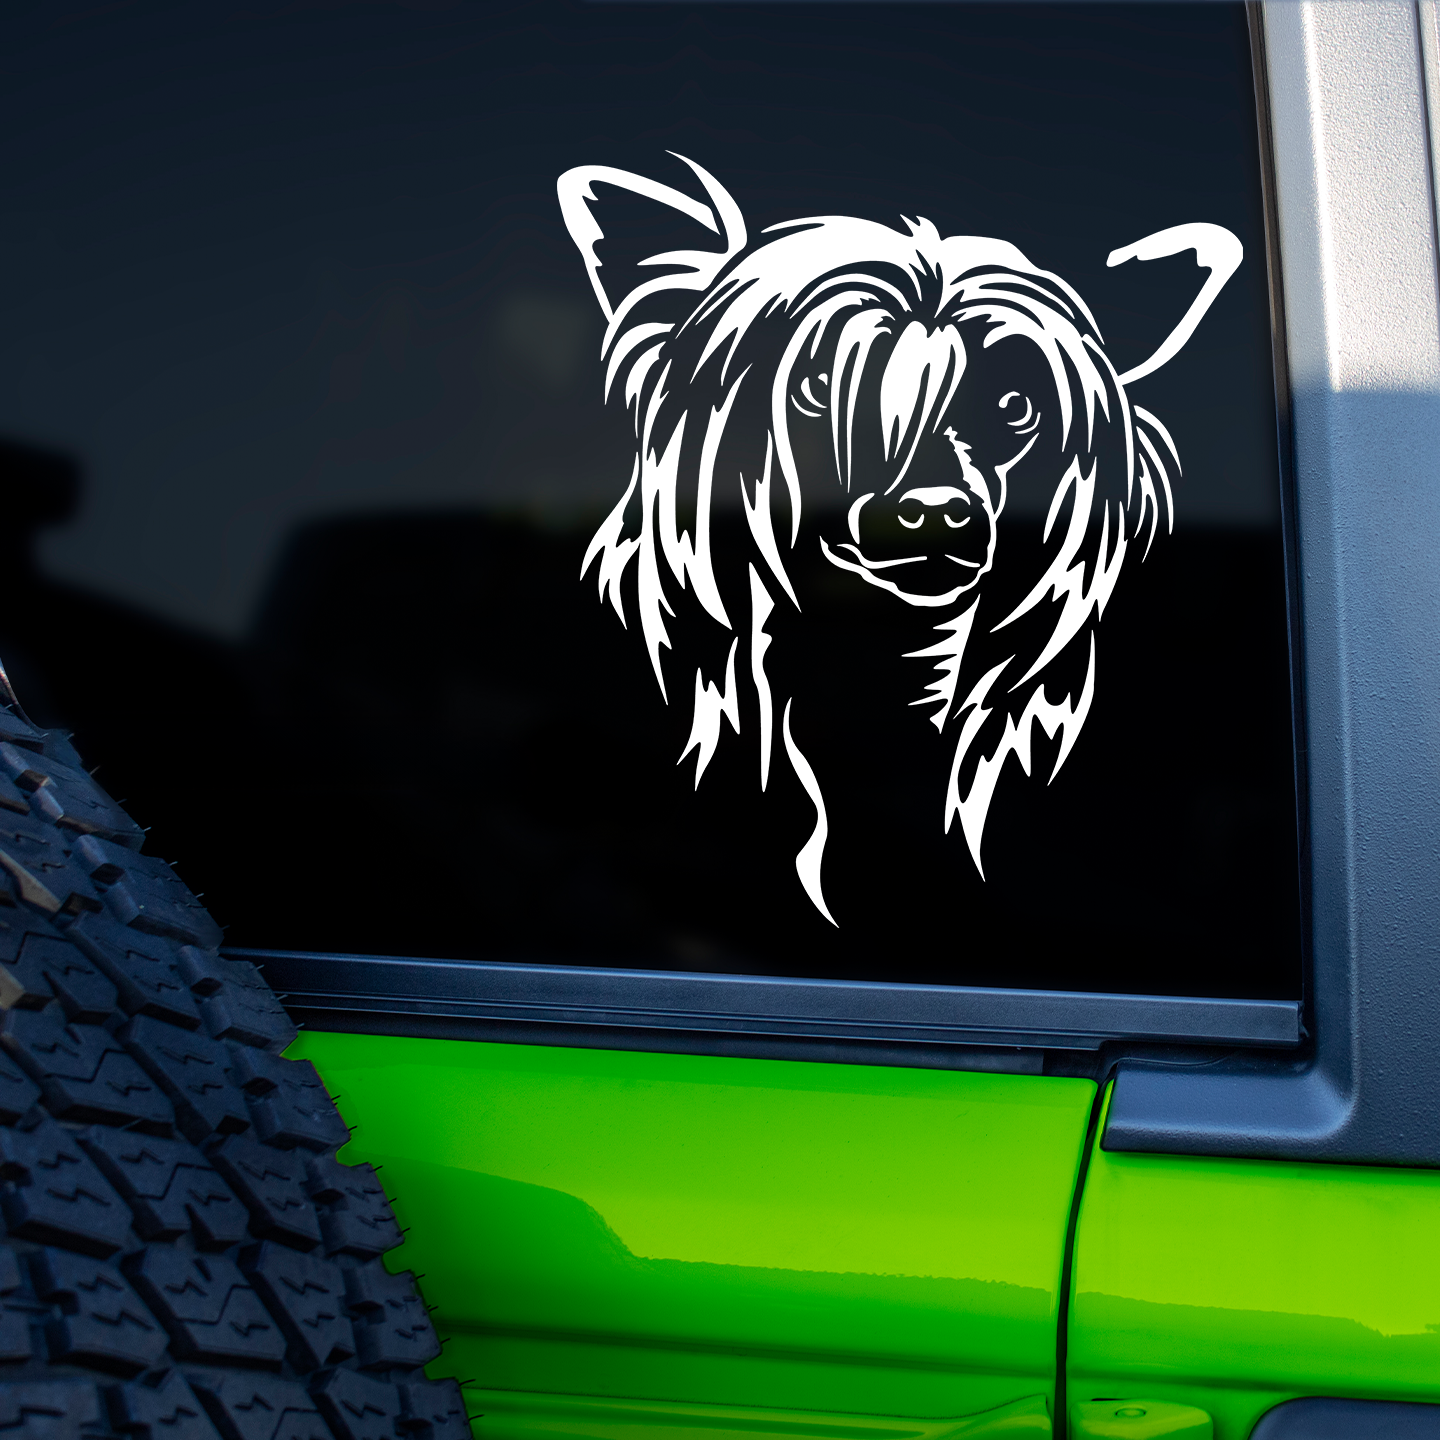 Chinese Crested Sticker